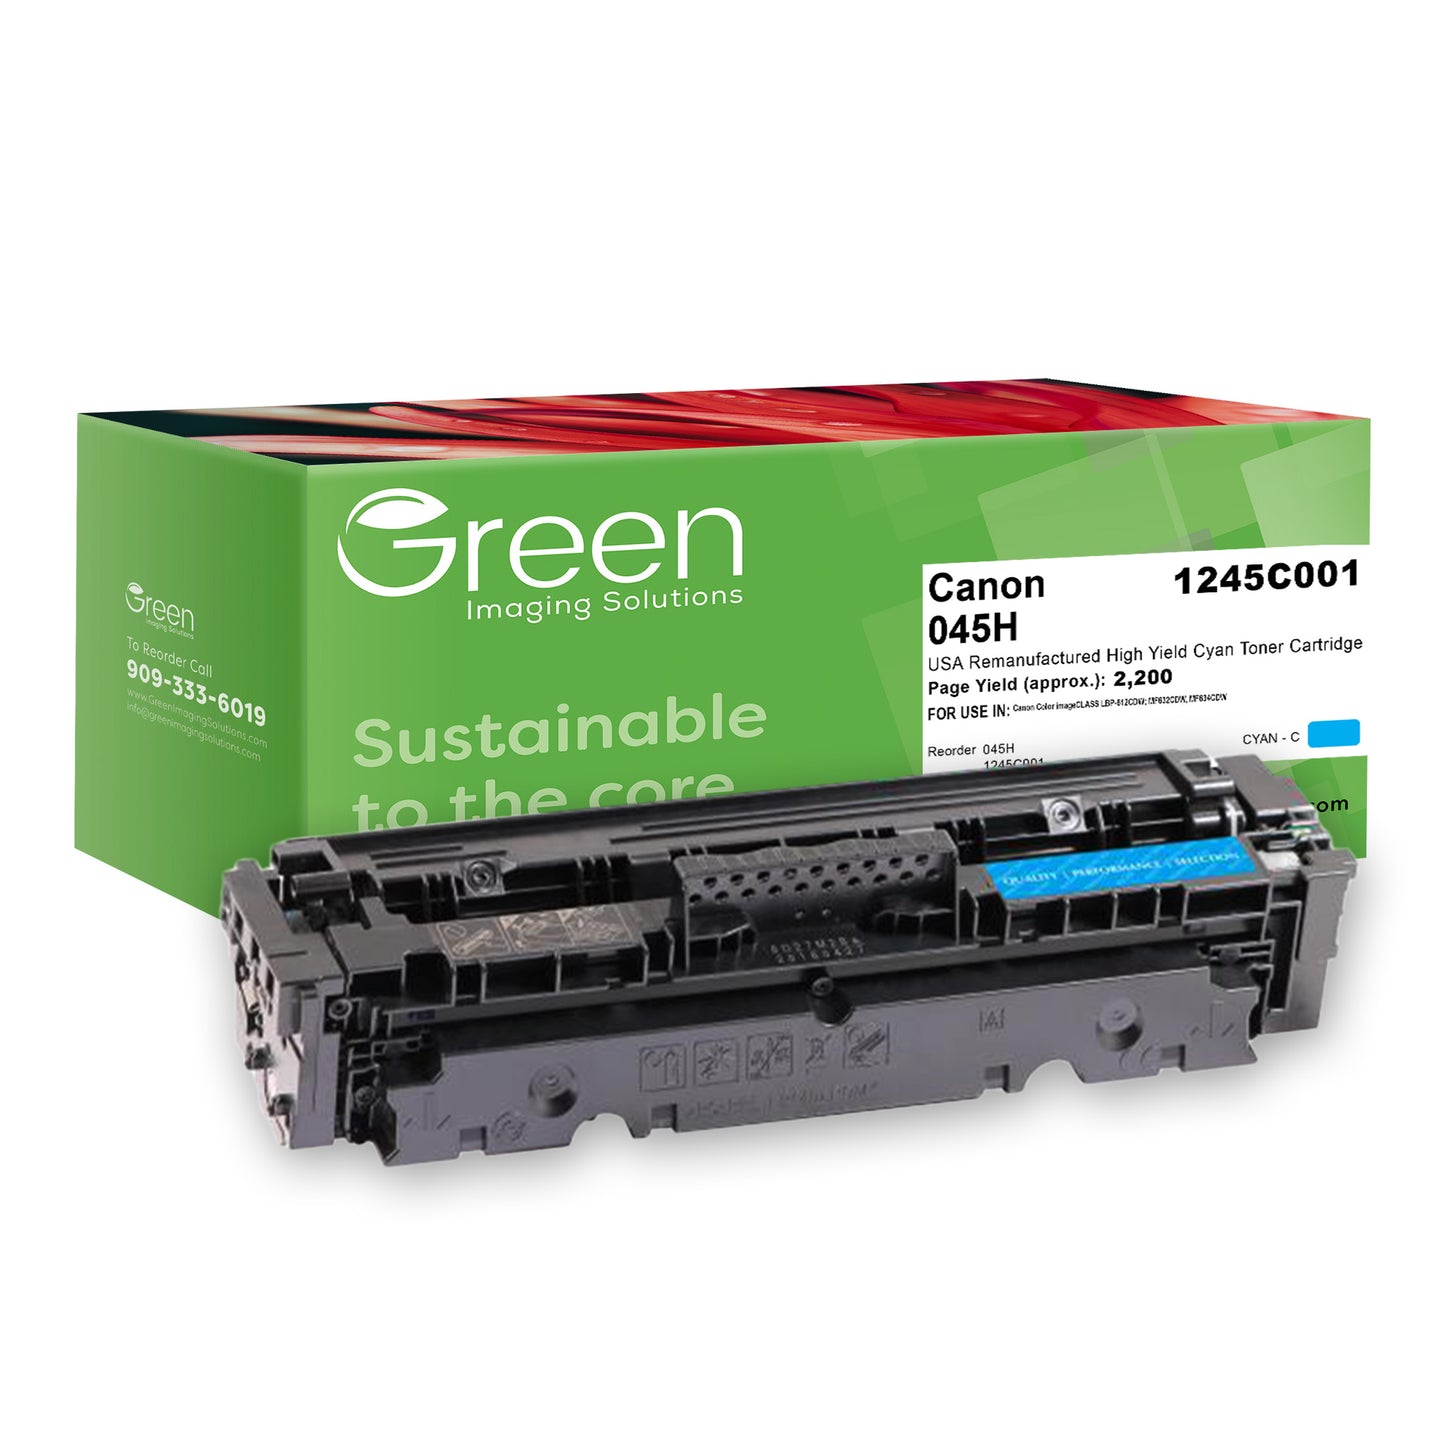 Green Imaging Solutions USA Remanufactured High Yield Cyan Toner Cartridge for Canon 1245C001 (045 H)